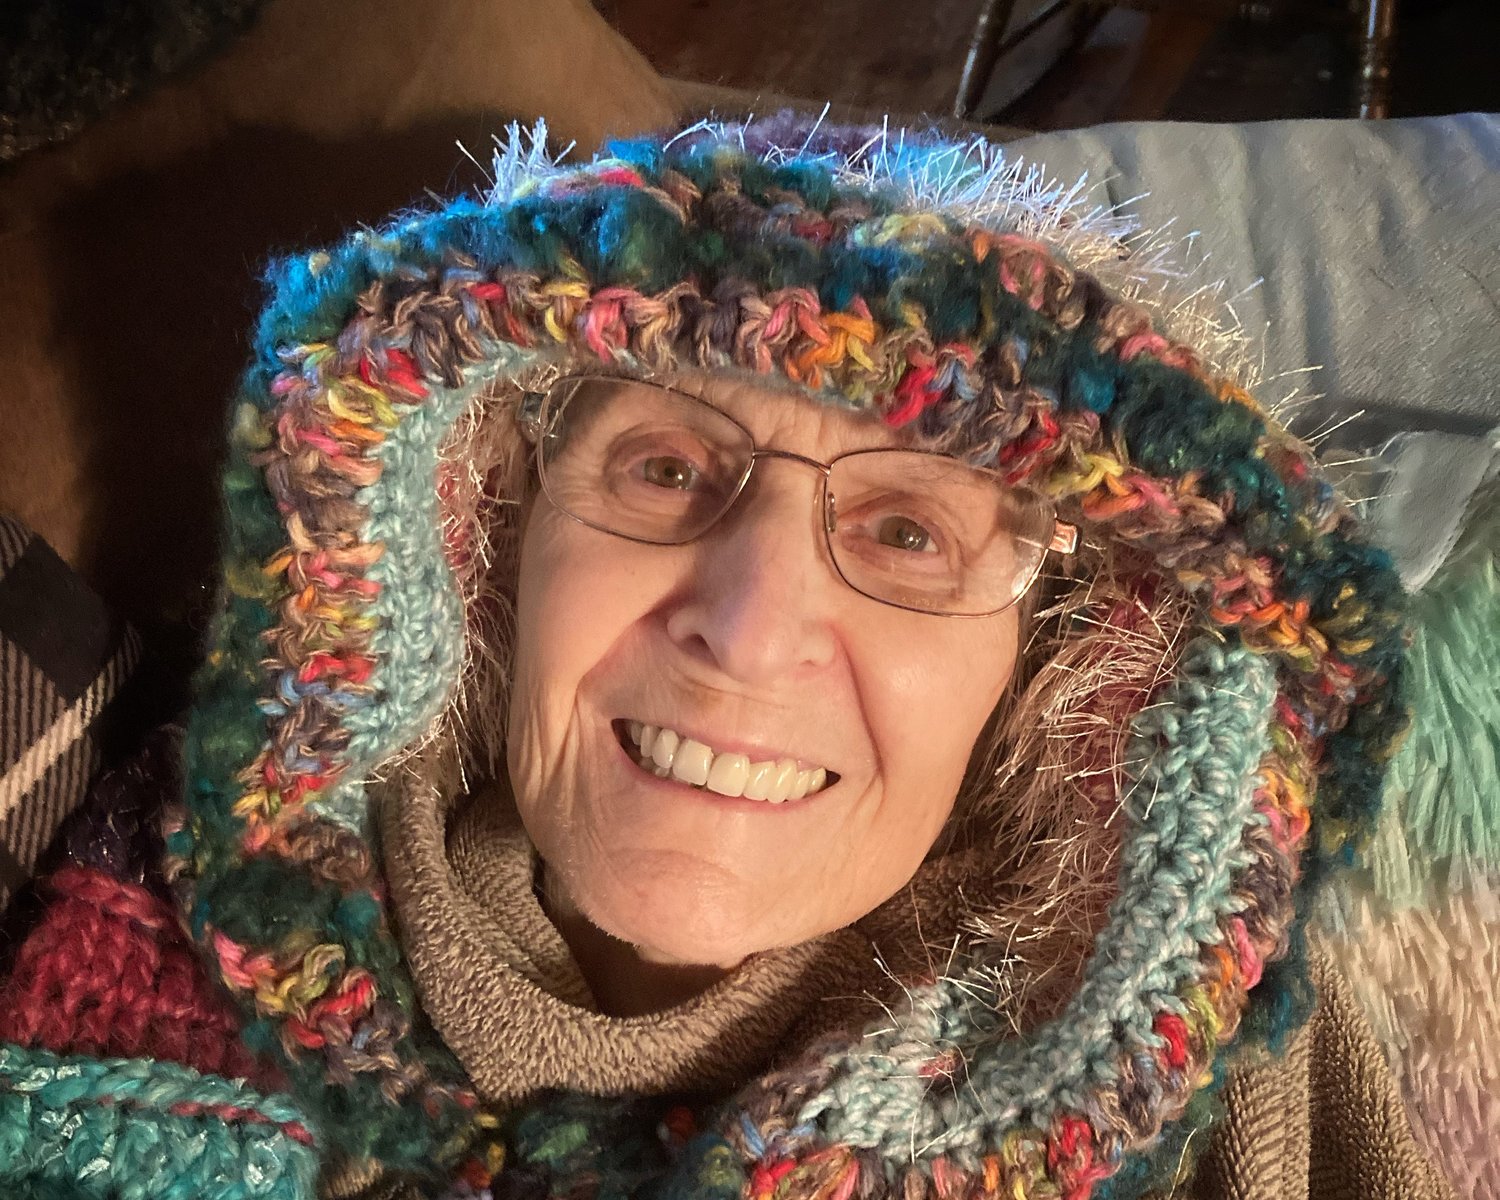 Mom, the Happy Hatster, is a big fan of funny headwear—the more colorful and crazier the better. Here are a few of her favorites. She also enjoys wearing mismatched socks, especially to doctor’s appointments.